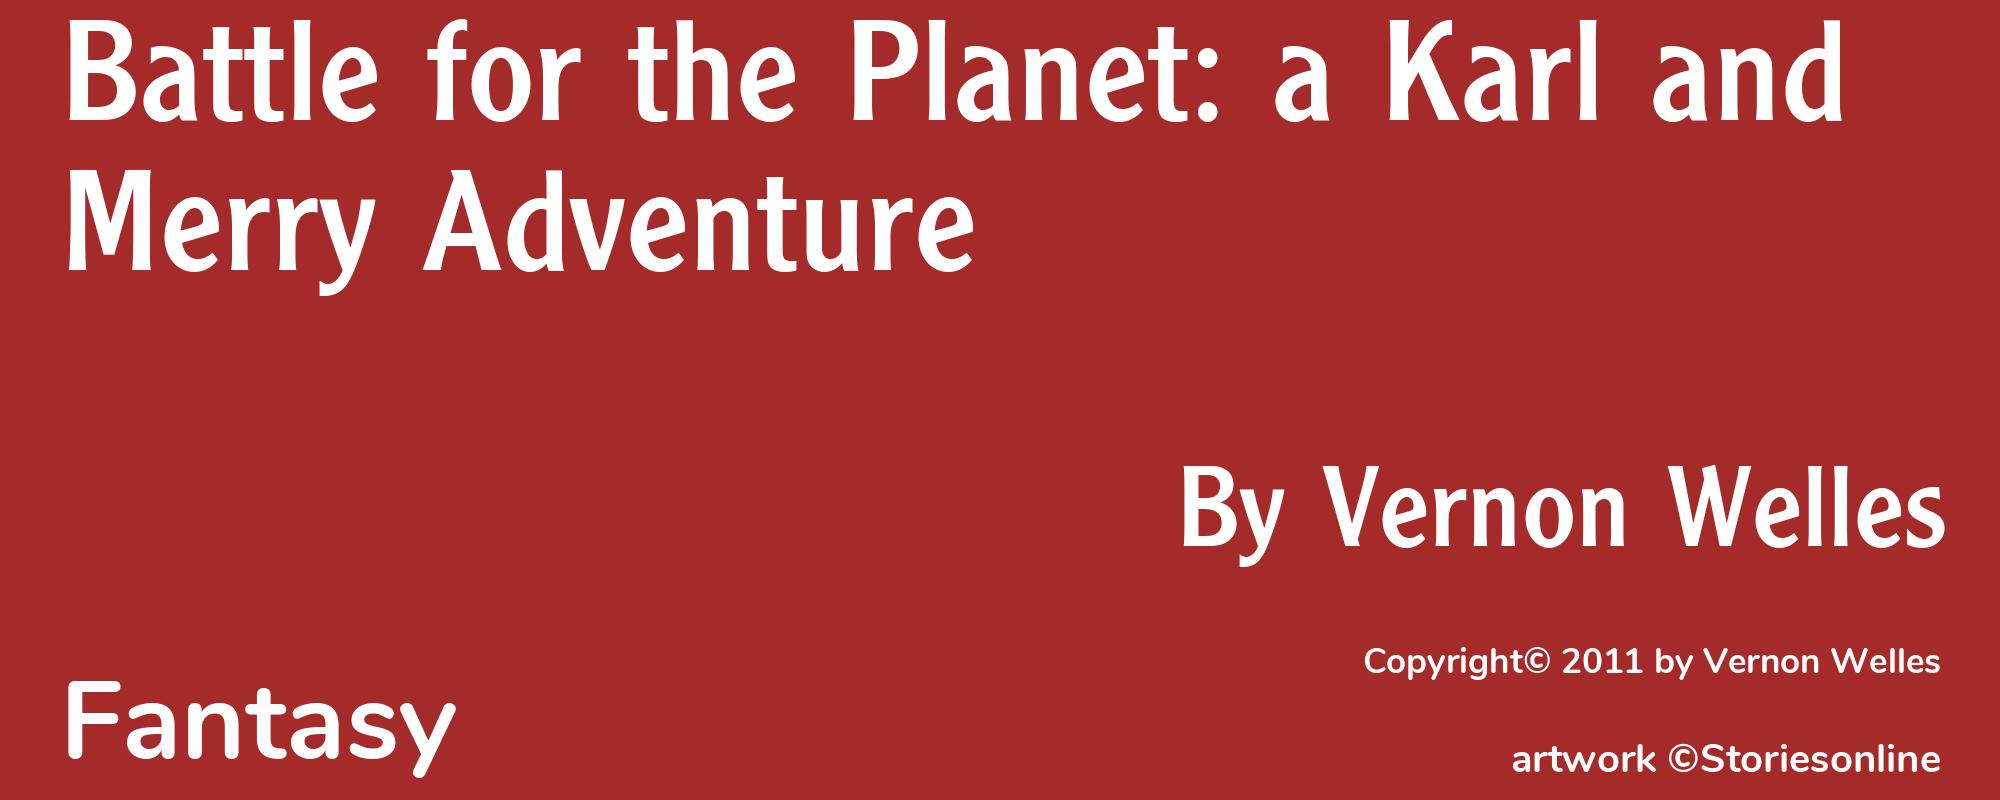 Battle for the Planet: a Karl and Merry Adventure - Cover